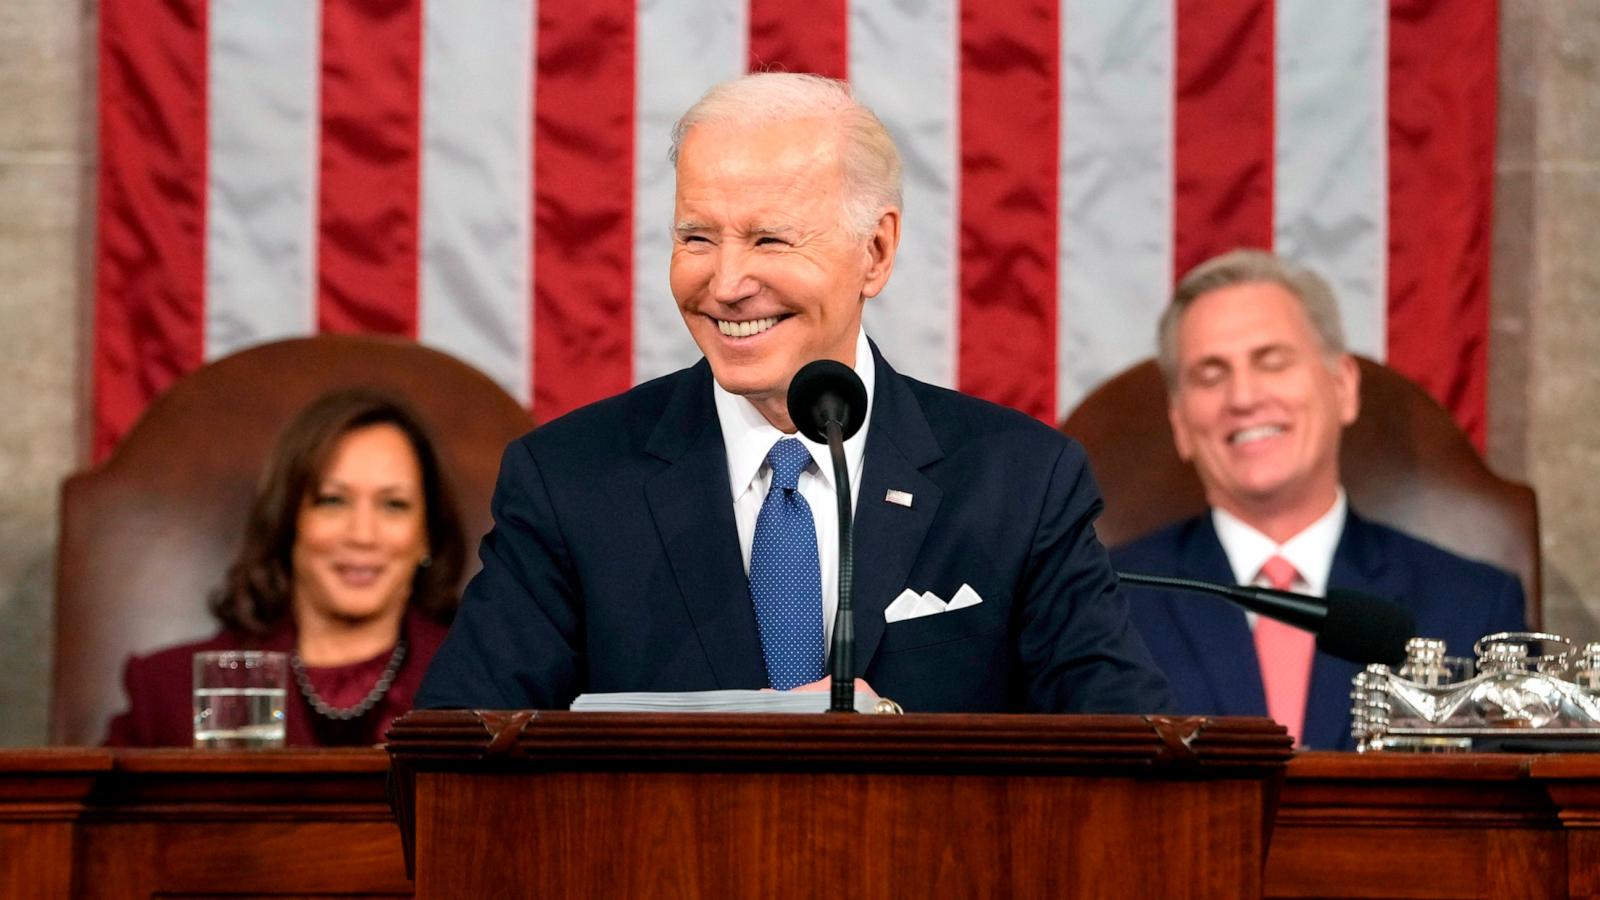 NAACP urges Biden to prioritize voting rights (Credits: ABC News)